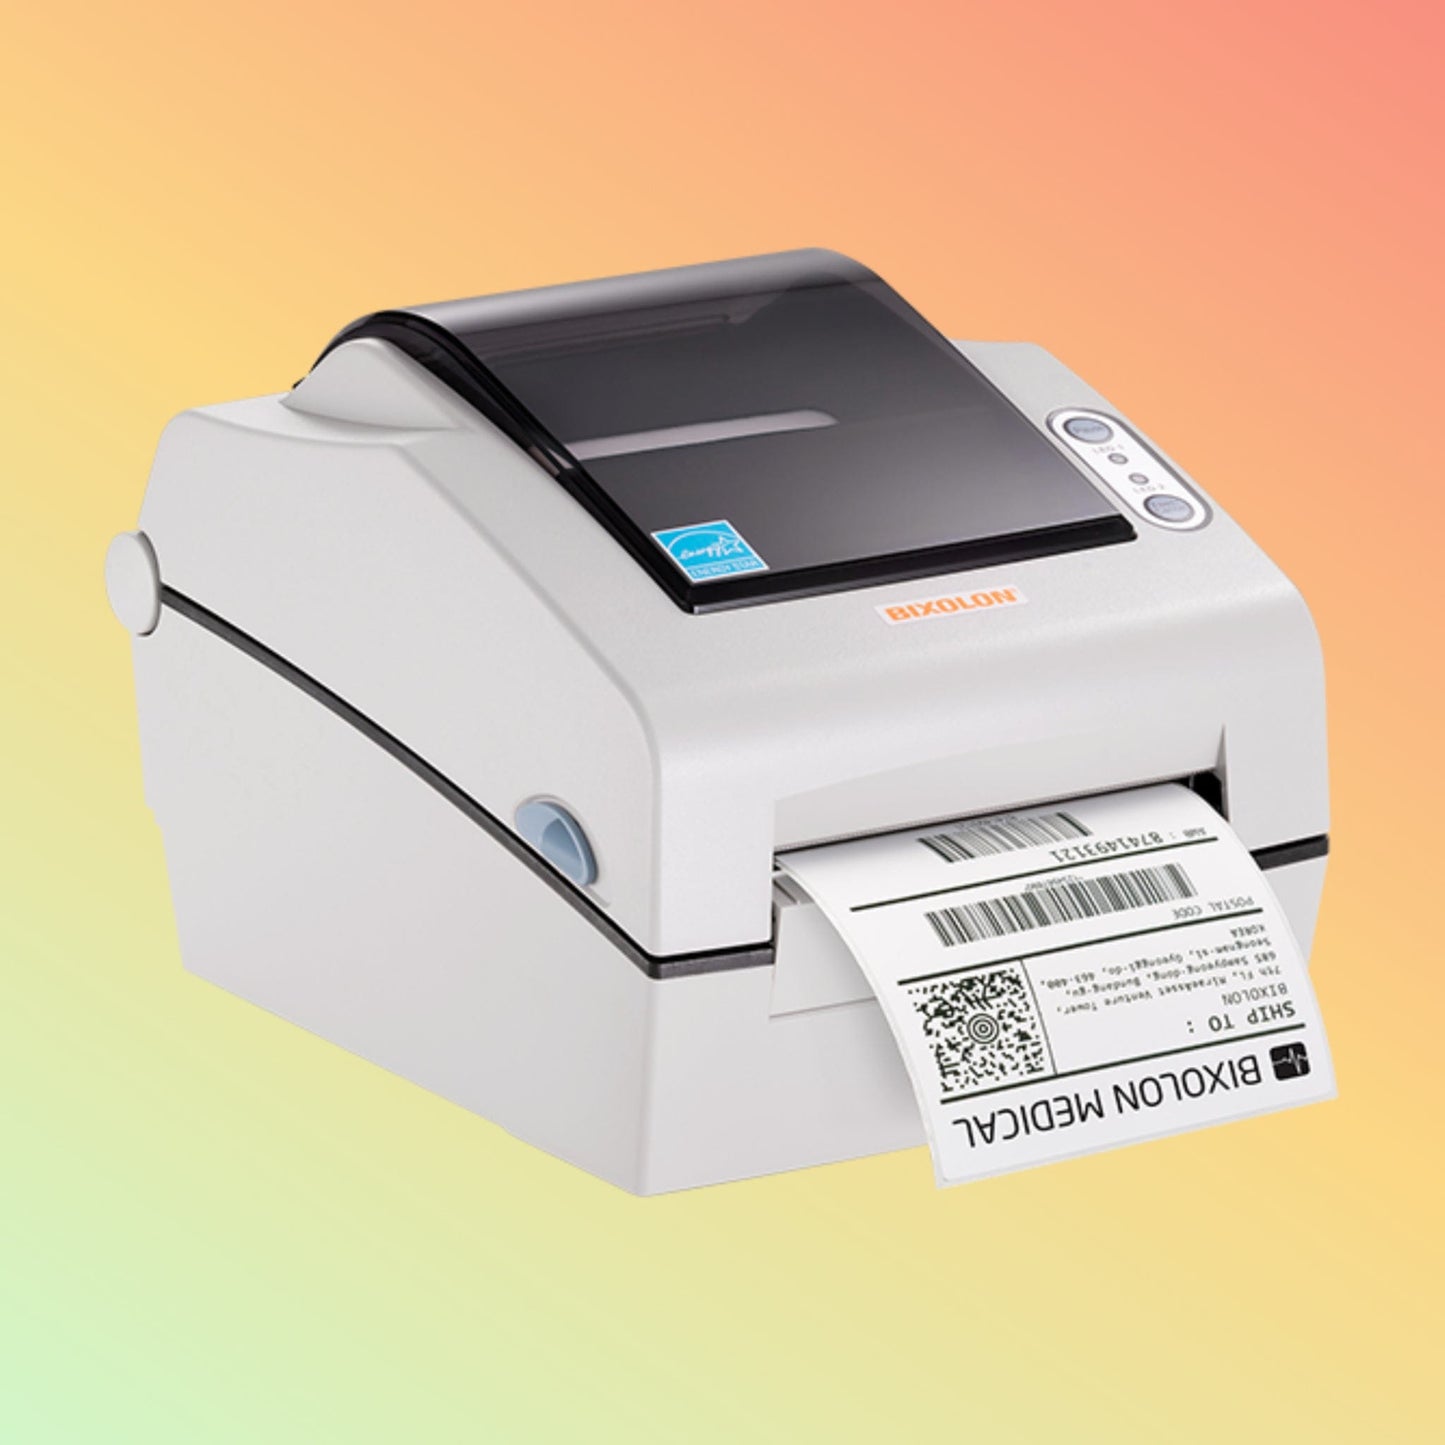 "Robust Bixolon SLP-D420 DG printer for durable labels, 203 dpi, ideal for manufacturing and logistics, with thermal technology."